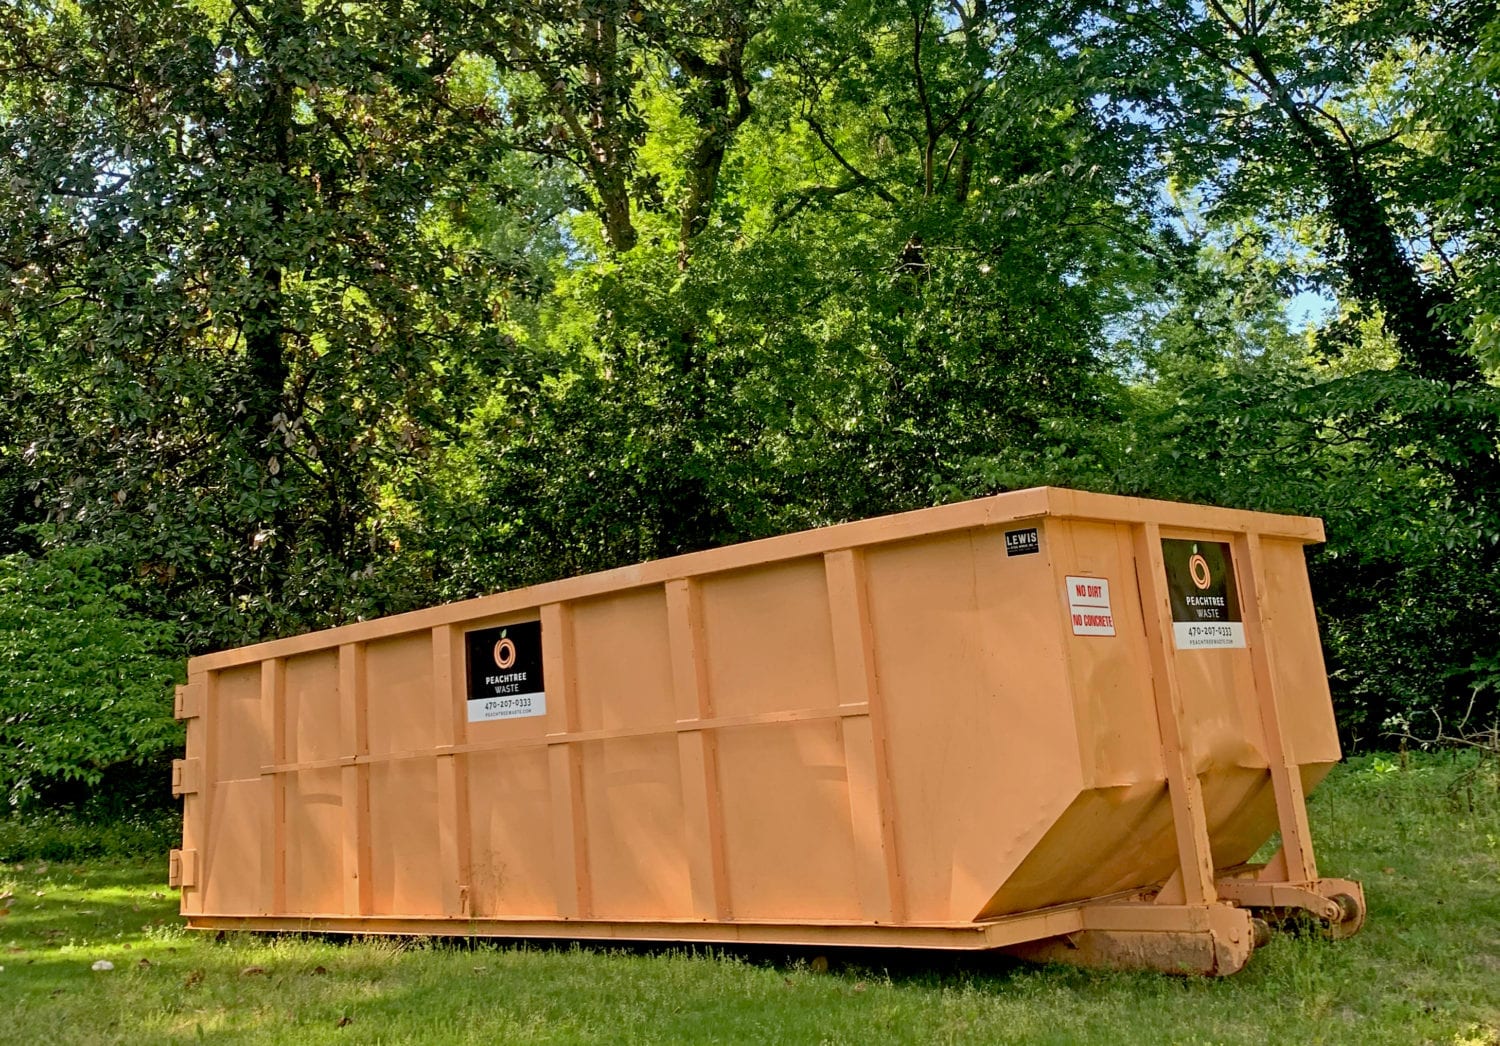 dumpster in the grass